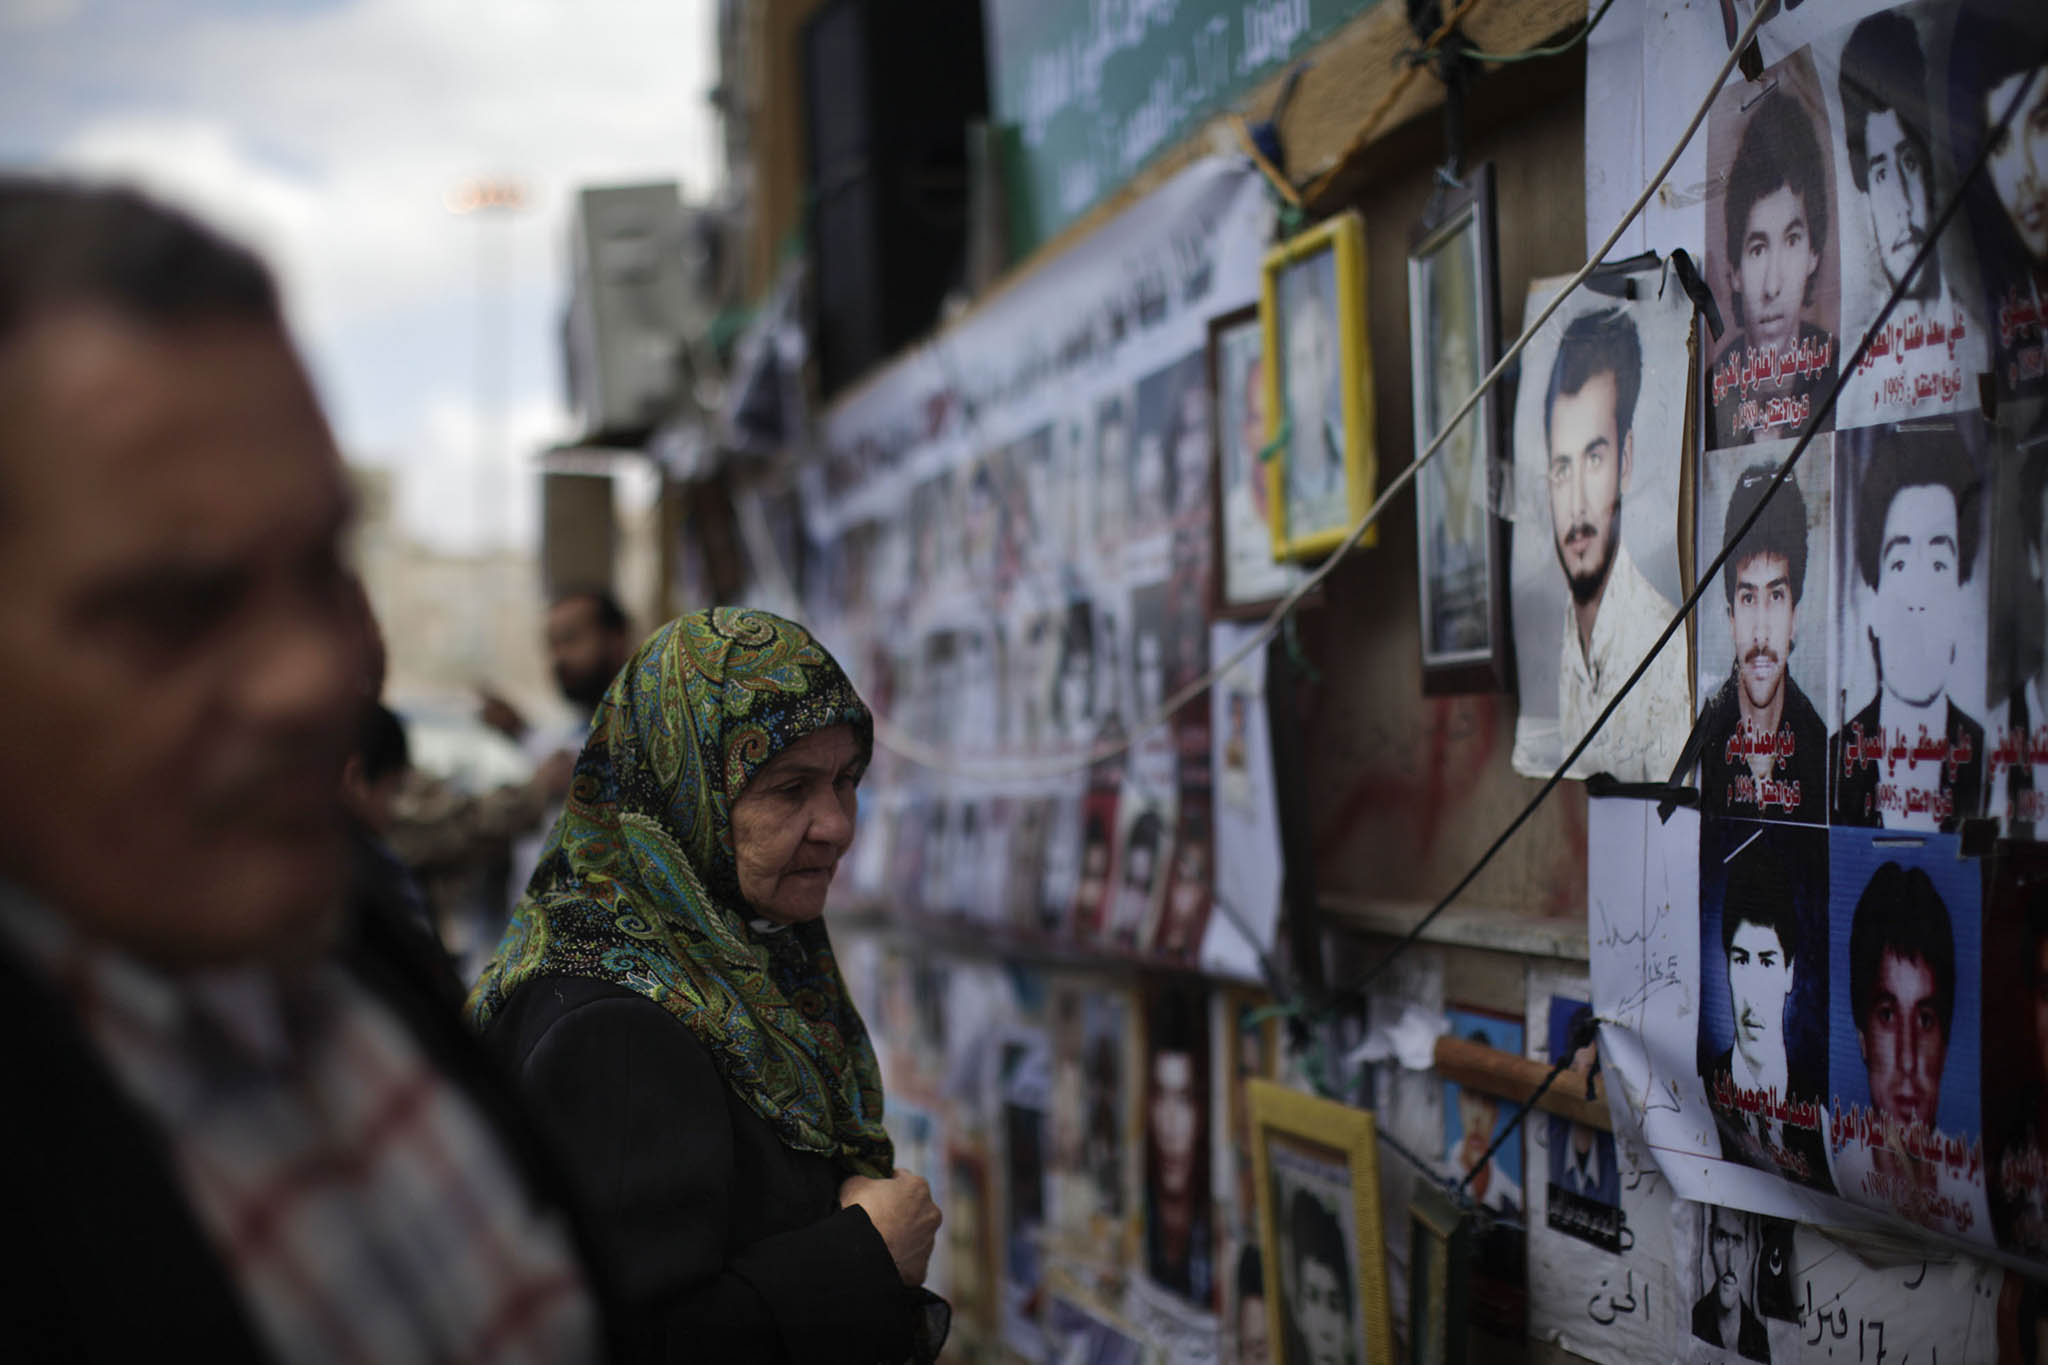 A woman looks at photos of men killed under the regime of Col. Moammar Gadhafi in Benghazi, Libya, on March 10, 2011. (Ed Ou/The New York Times)